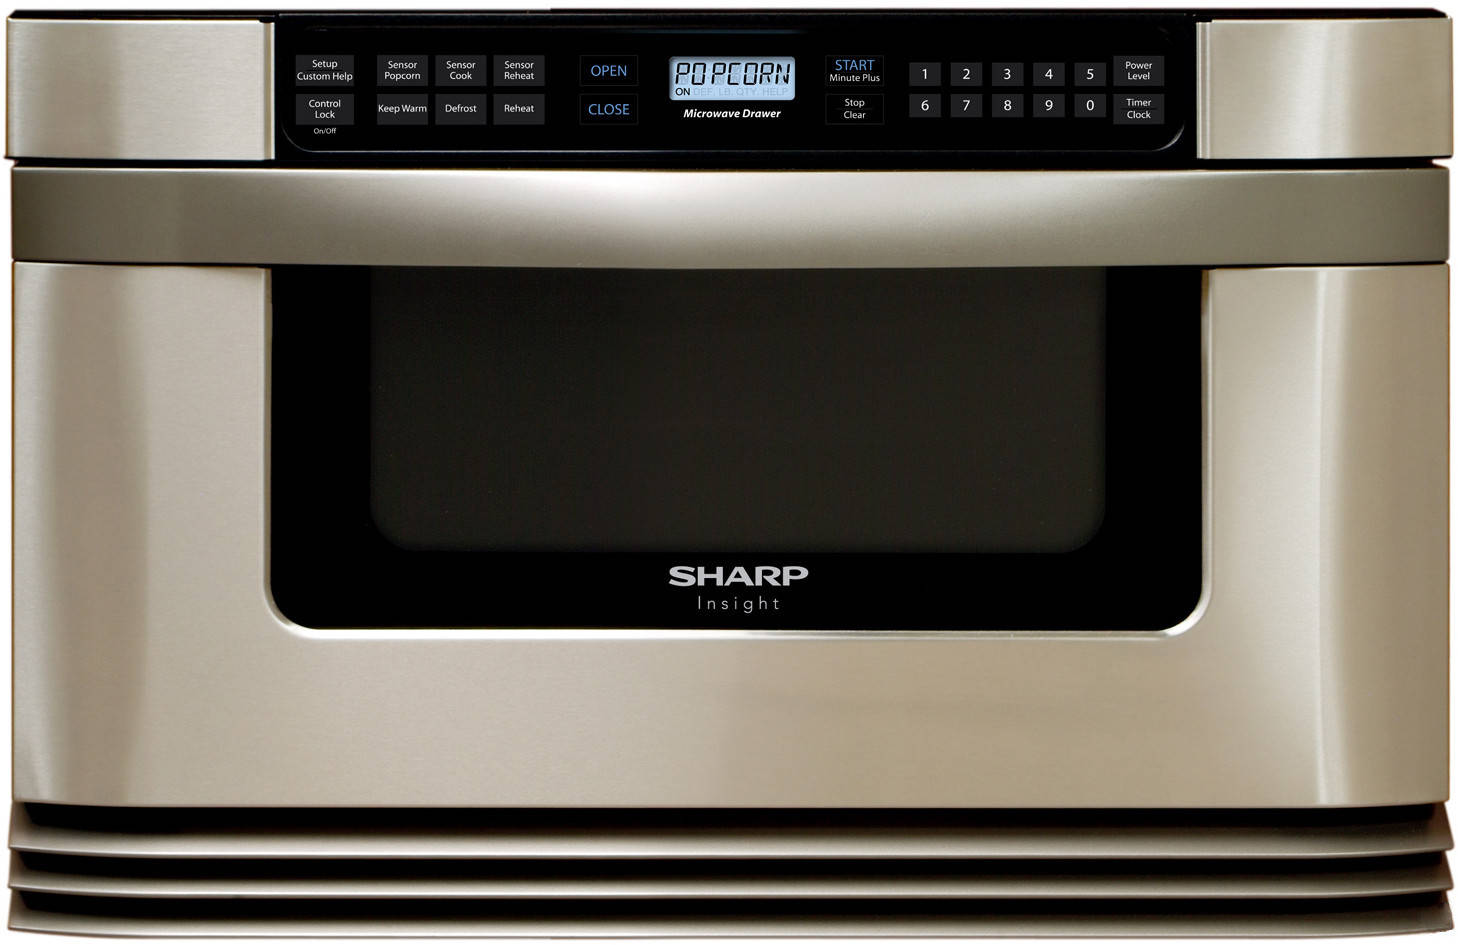 Sharp KB6021MS 24" Microwave Drawer with 1.0 Cubic ft